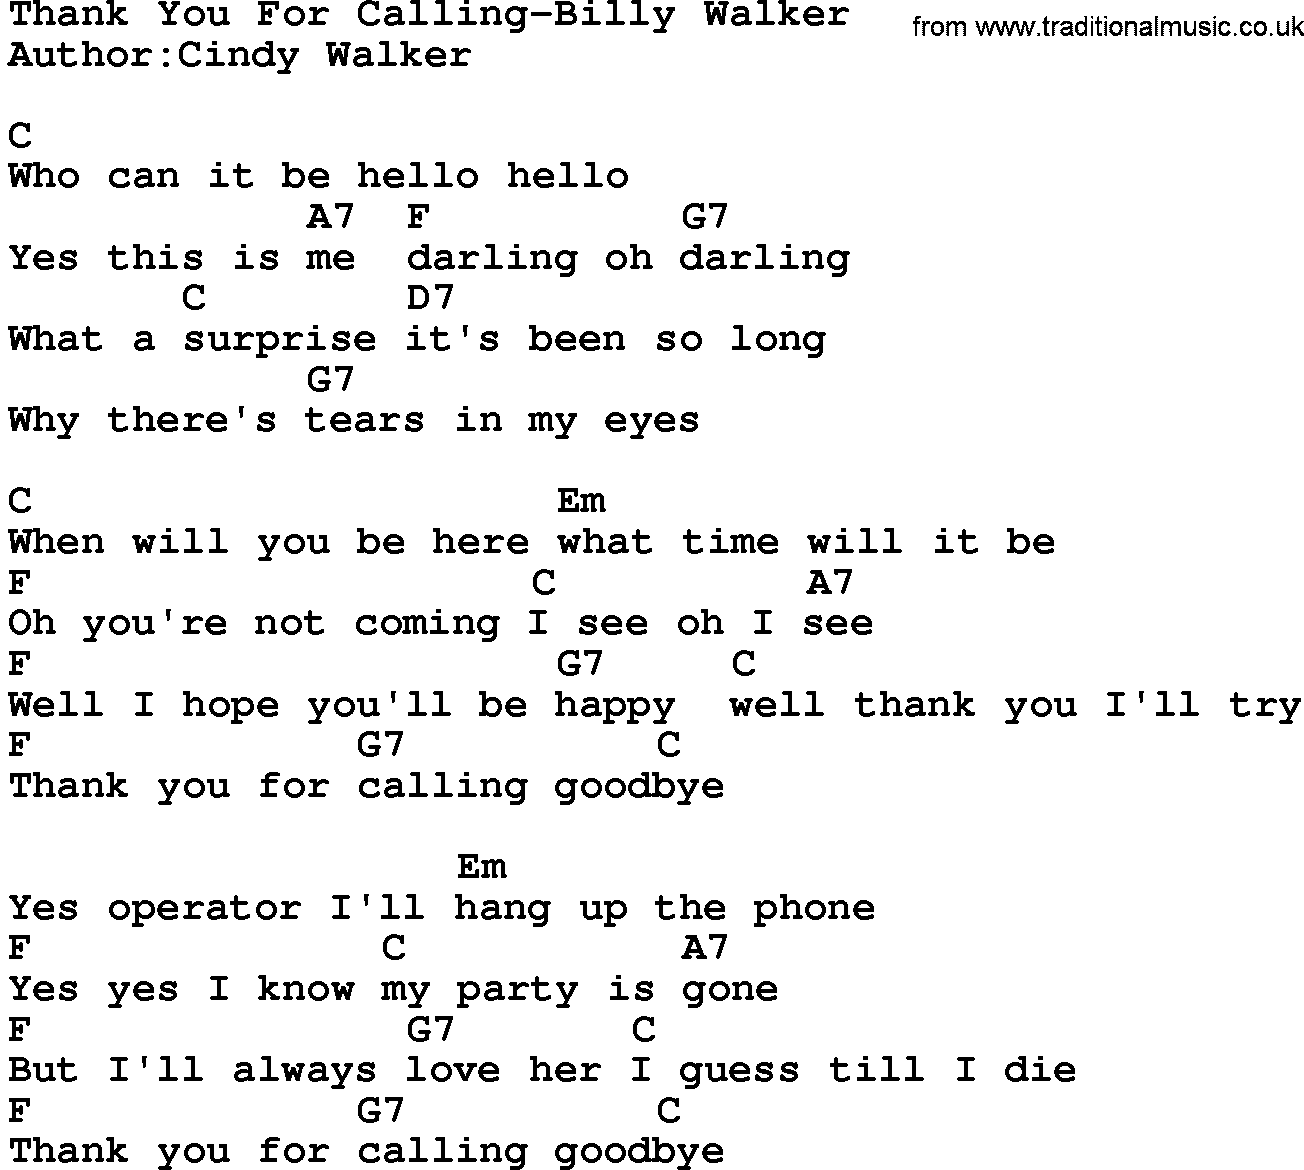 Country music song: Thank You For Calling-Billy Walker lyrics and chords